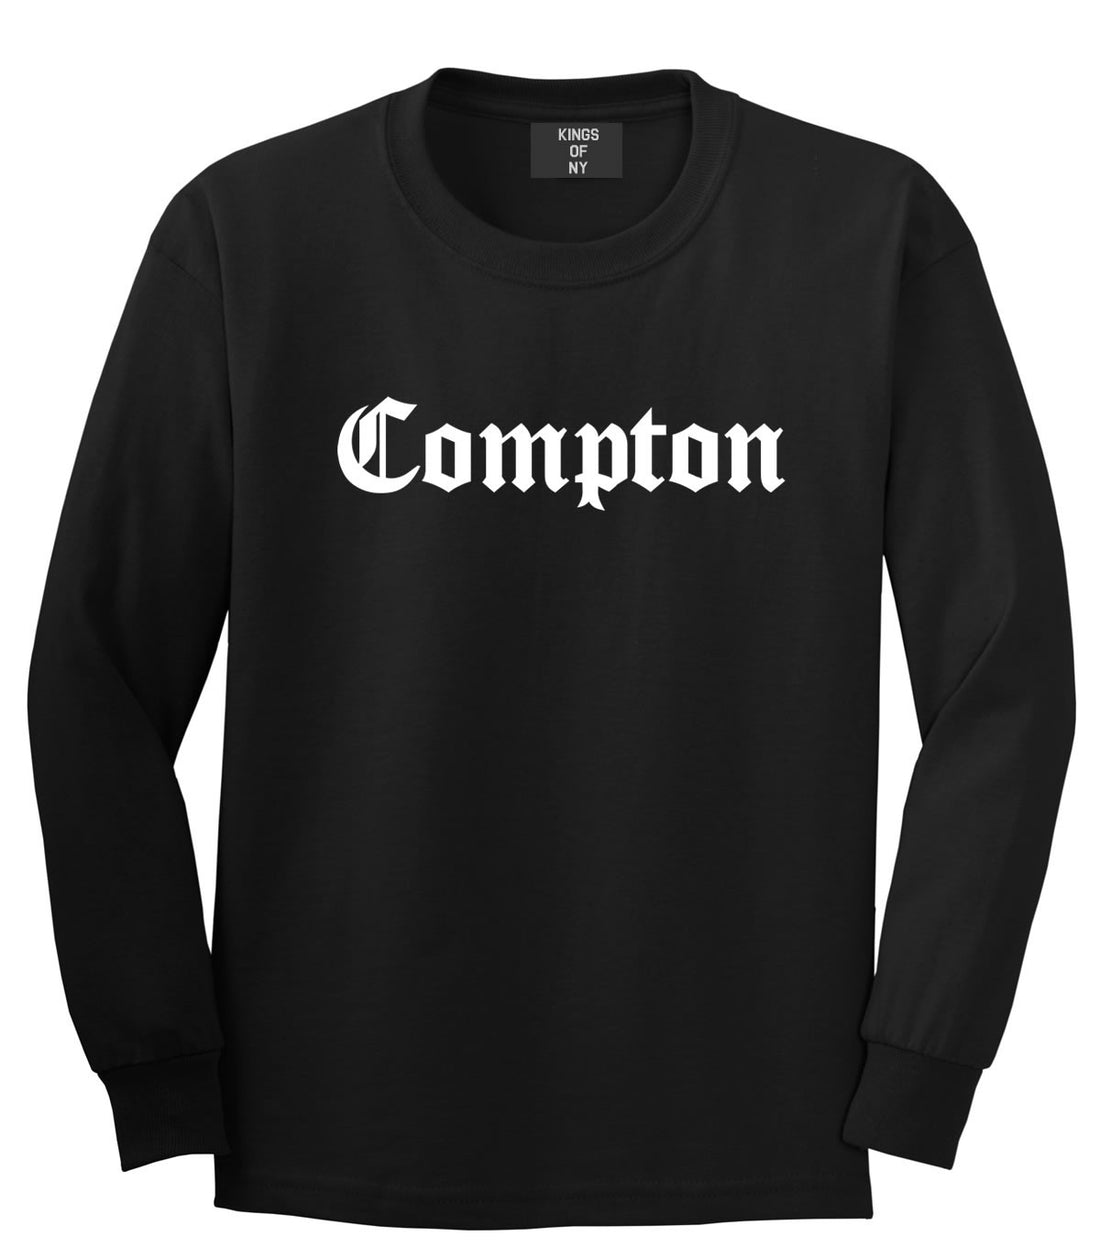 Kings Of NY Compton Long Sleeve T-Shirt in Black